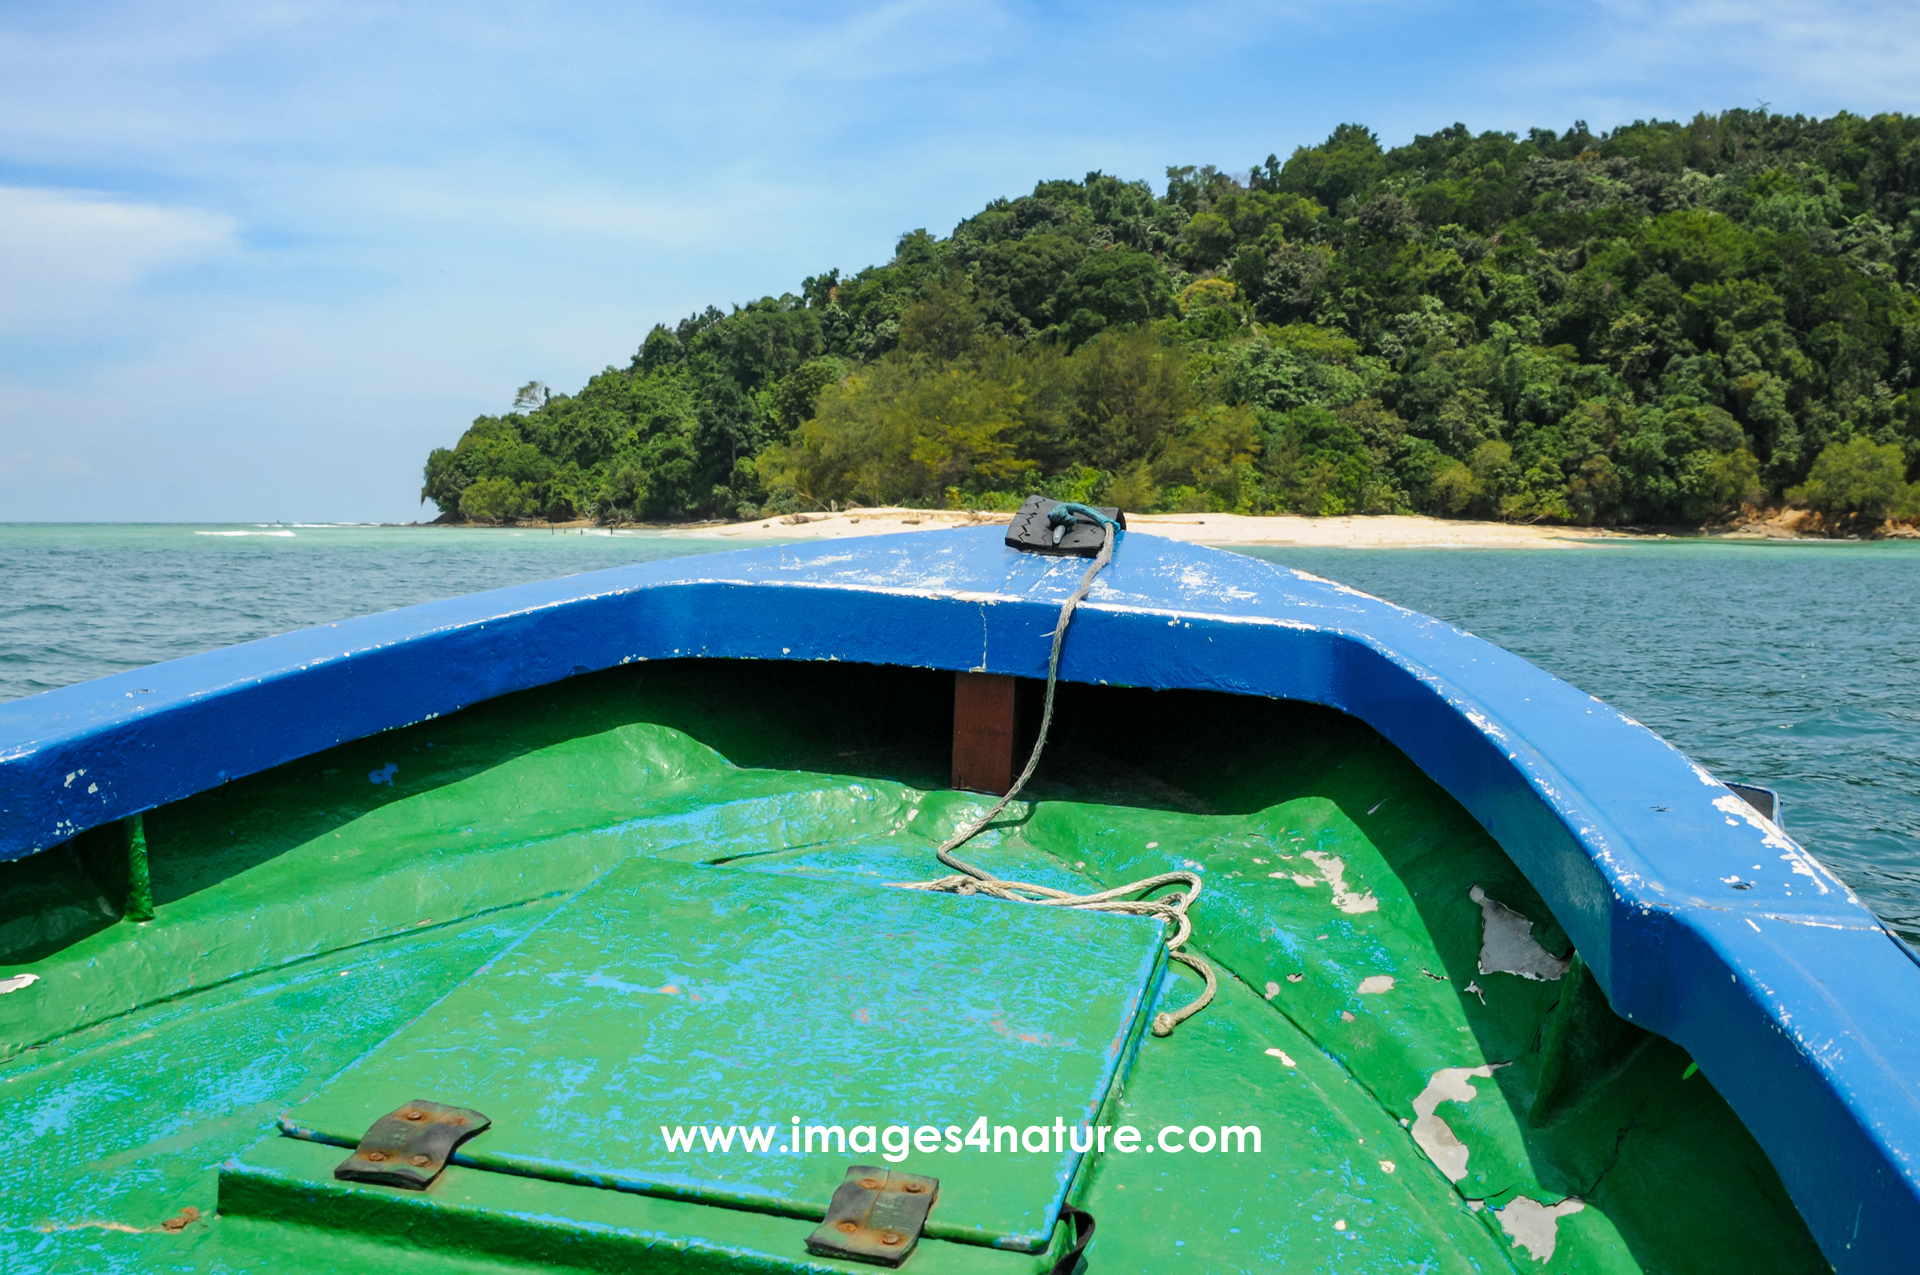 Small green and blue painted boat approach tropical island